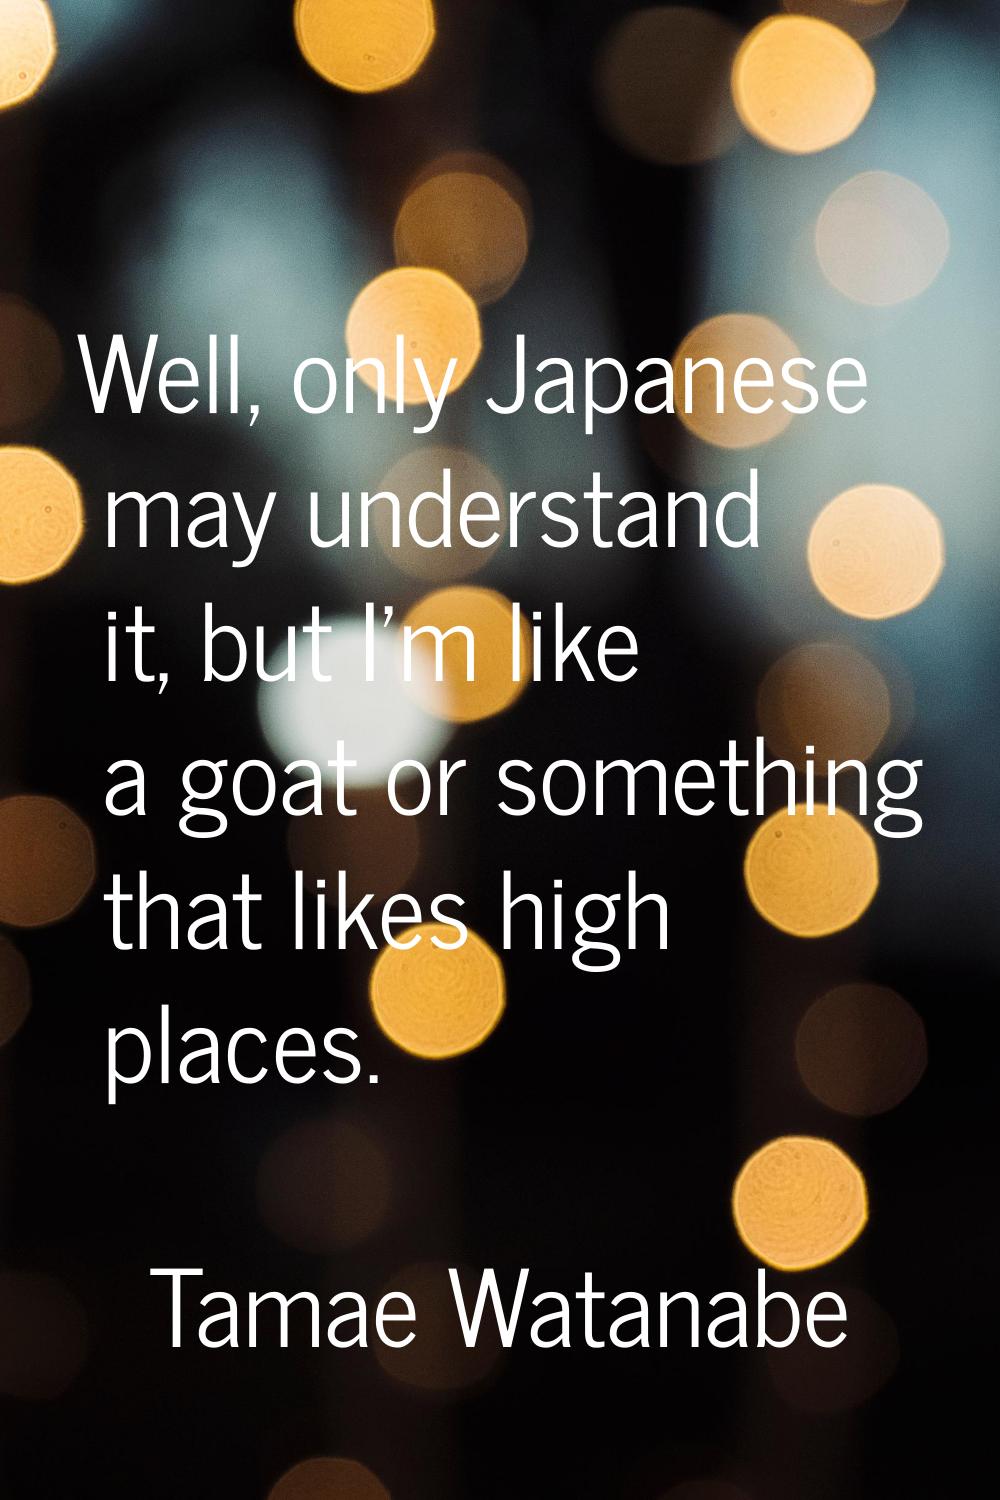 Well, only Japanese may understand it, but I'm like a goat or something that likes high places.